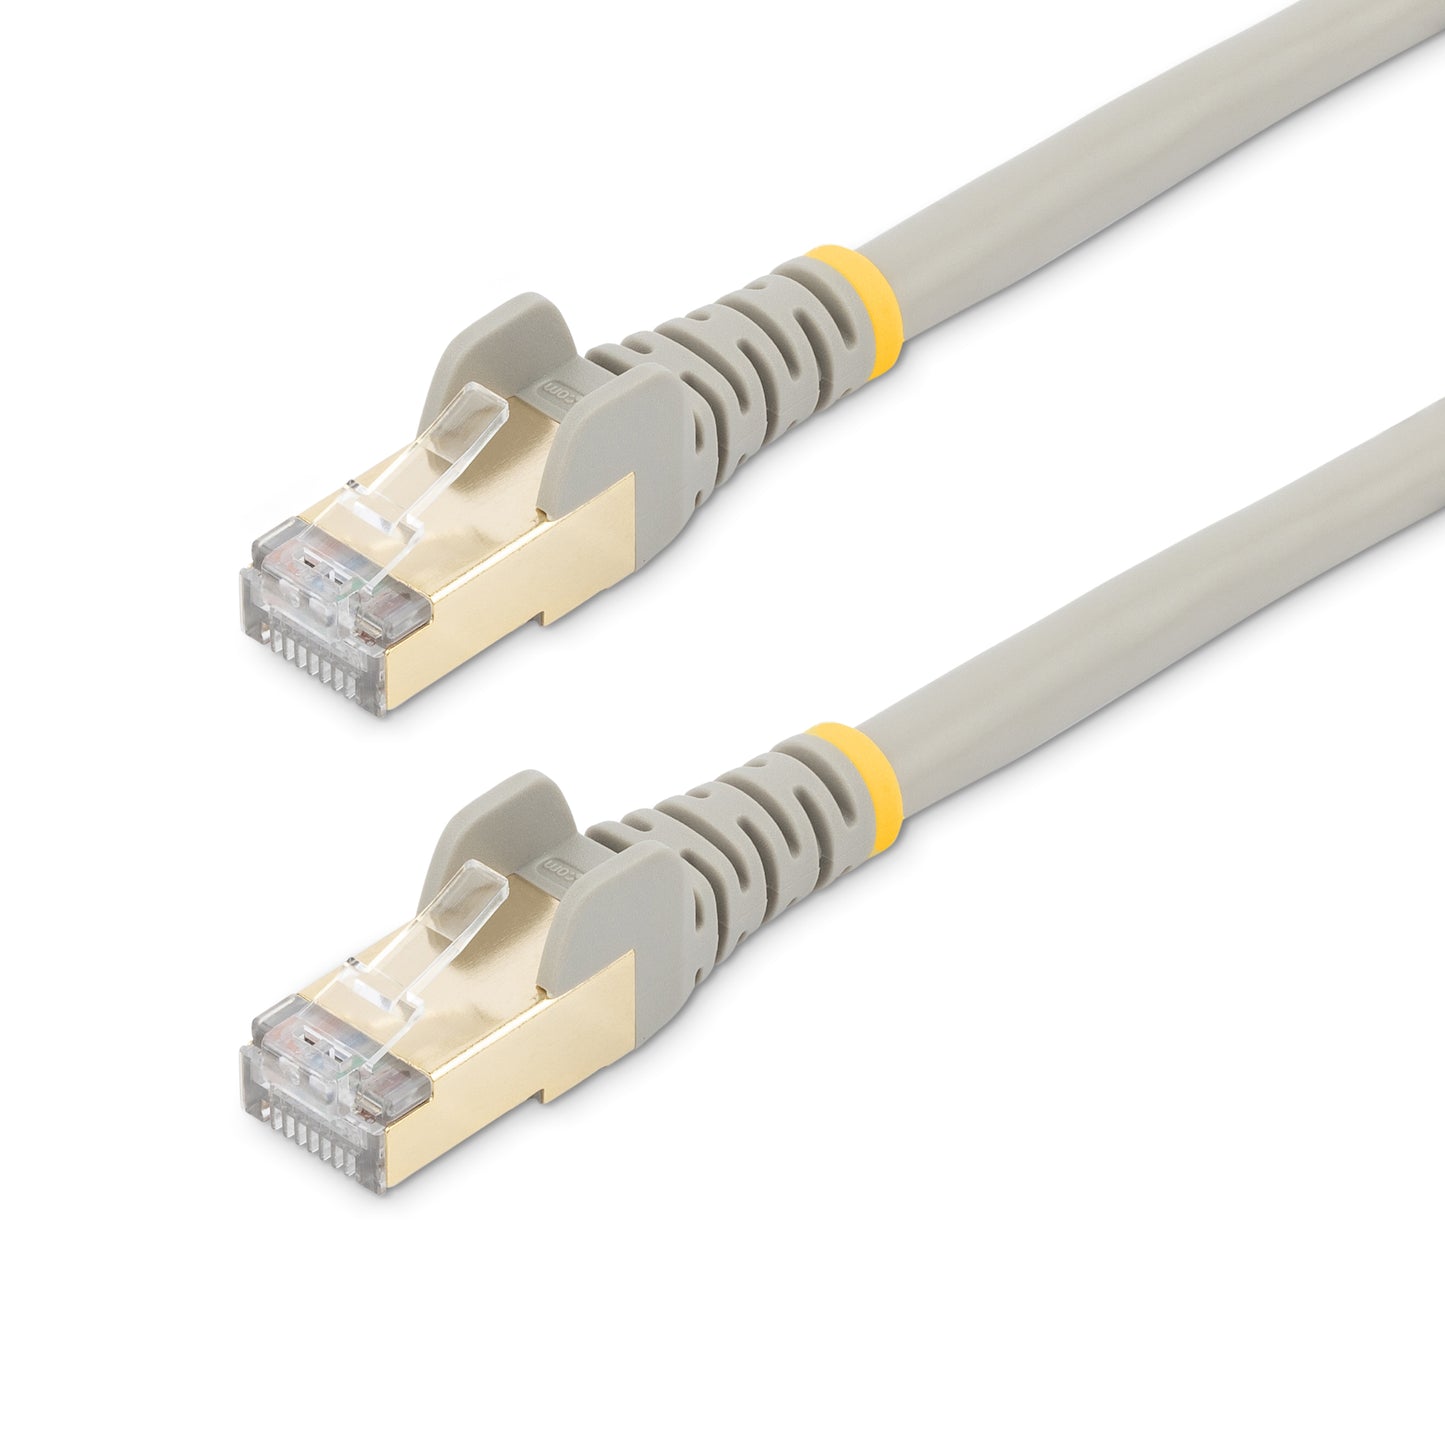 StarTech.com 3m CAT6a Ethernet Cable - 10 Gigabit Shielded Snagless RJ45 100W PoE Patch Cord - 10GbE STP Network Cable w/Strain Relief - Grey Fluke Tested/Wiring is UL Certified/TIA-3